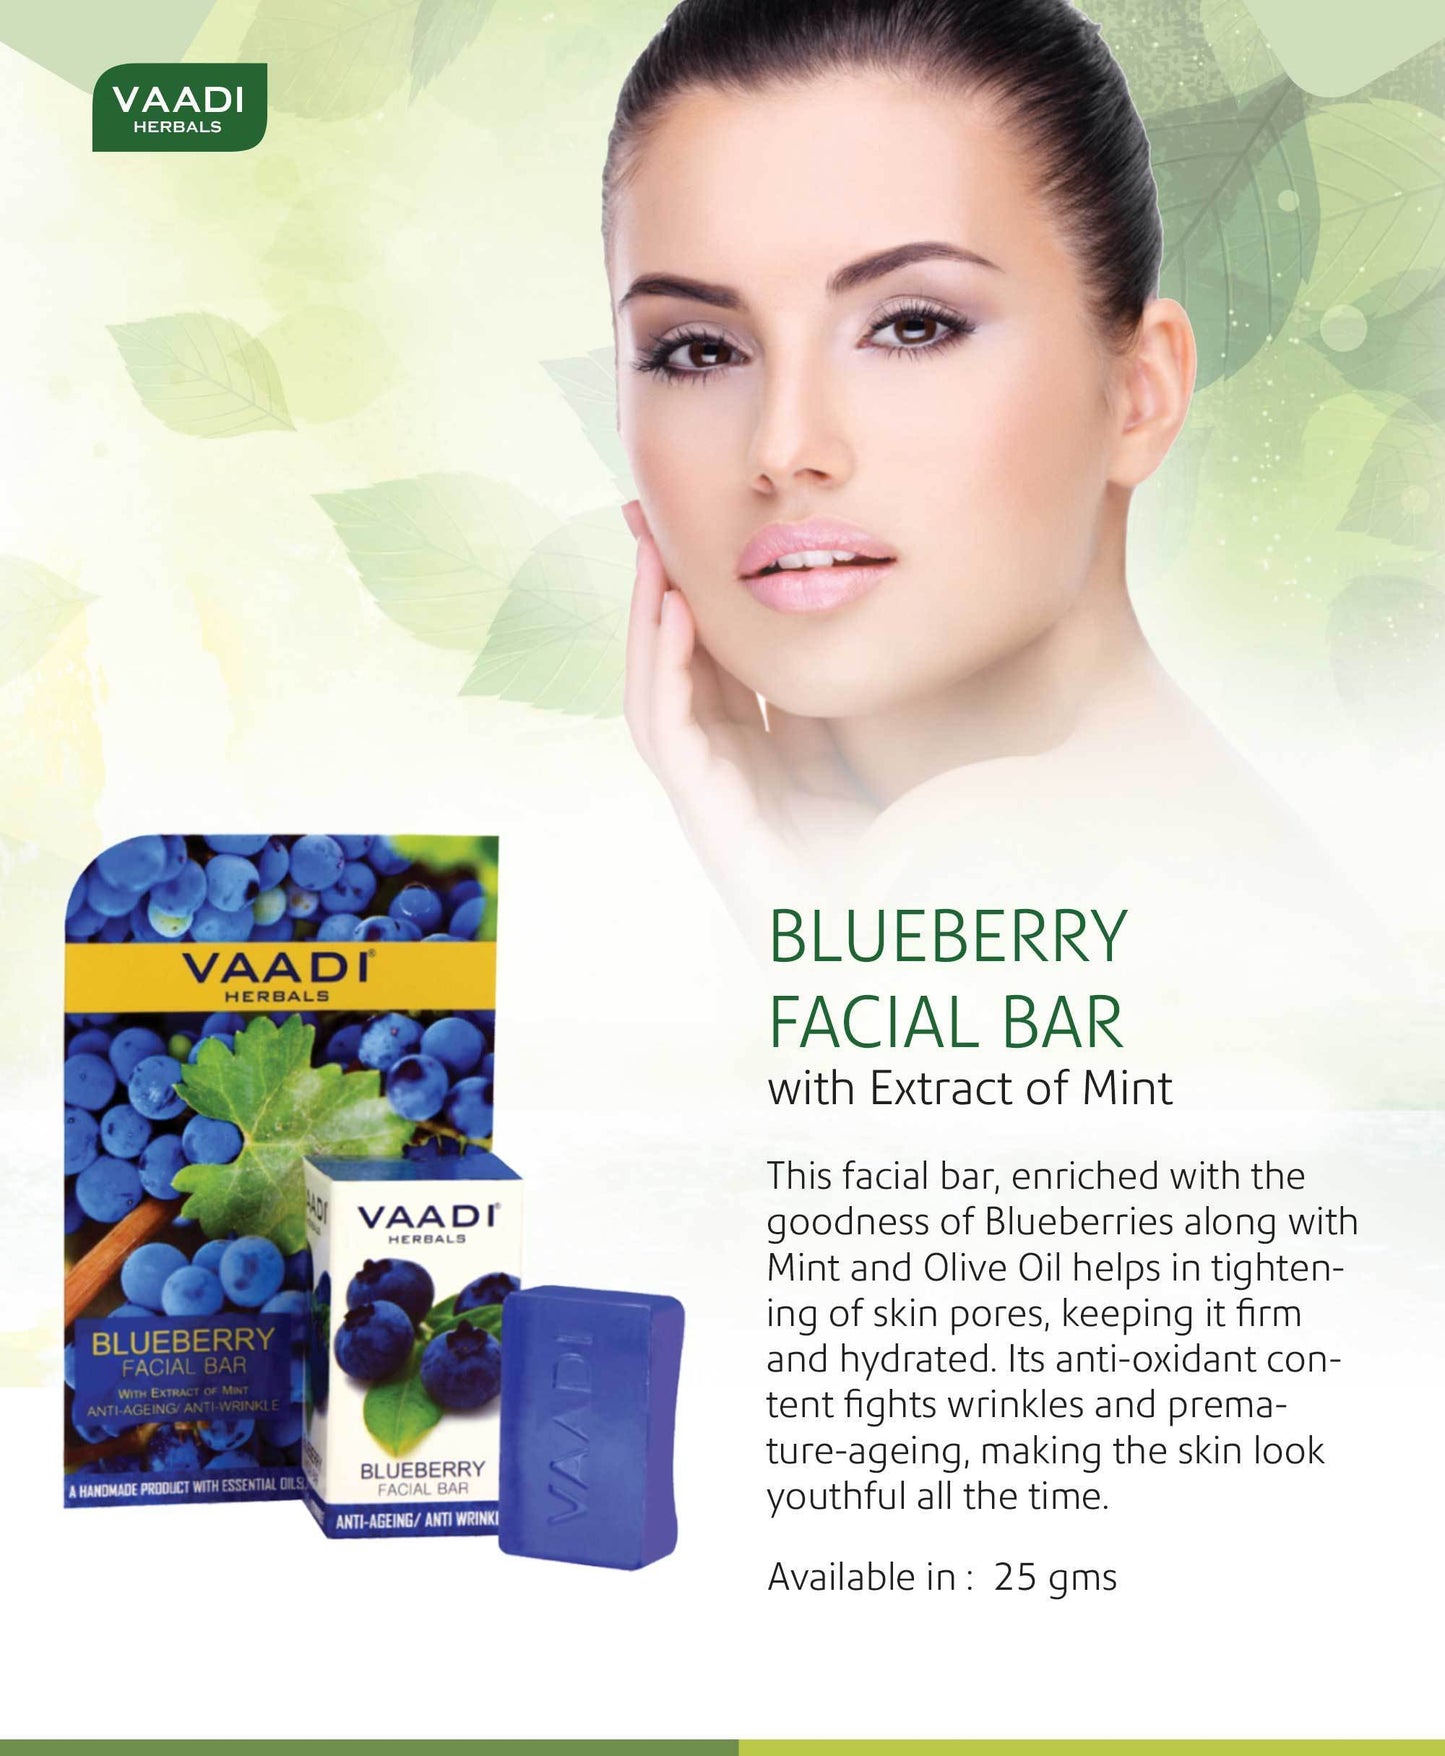 Organic Blueberry Facial Bar with Mint Extract & Olive Oil - Prevents Wrinkles - Makes Skin Youthful (6 x 25 gms/0.9 oz)